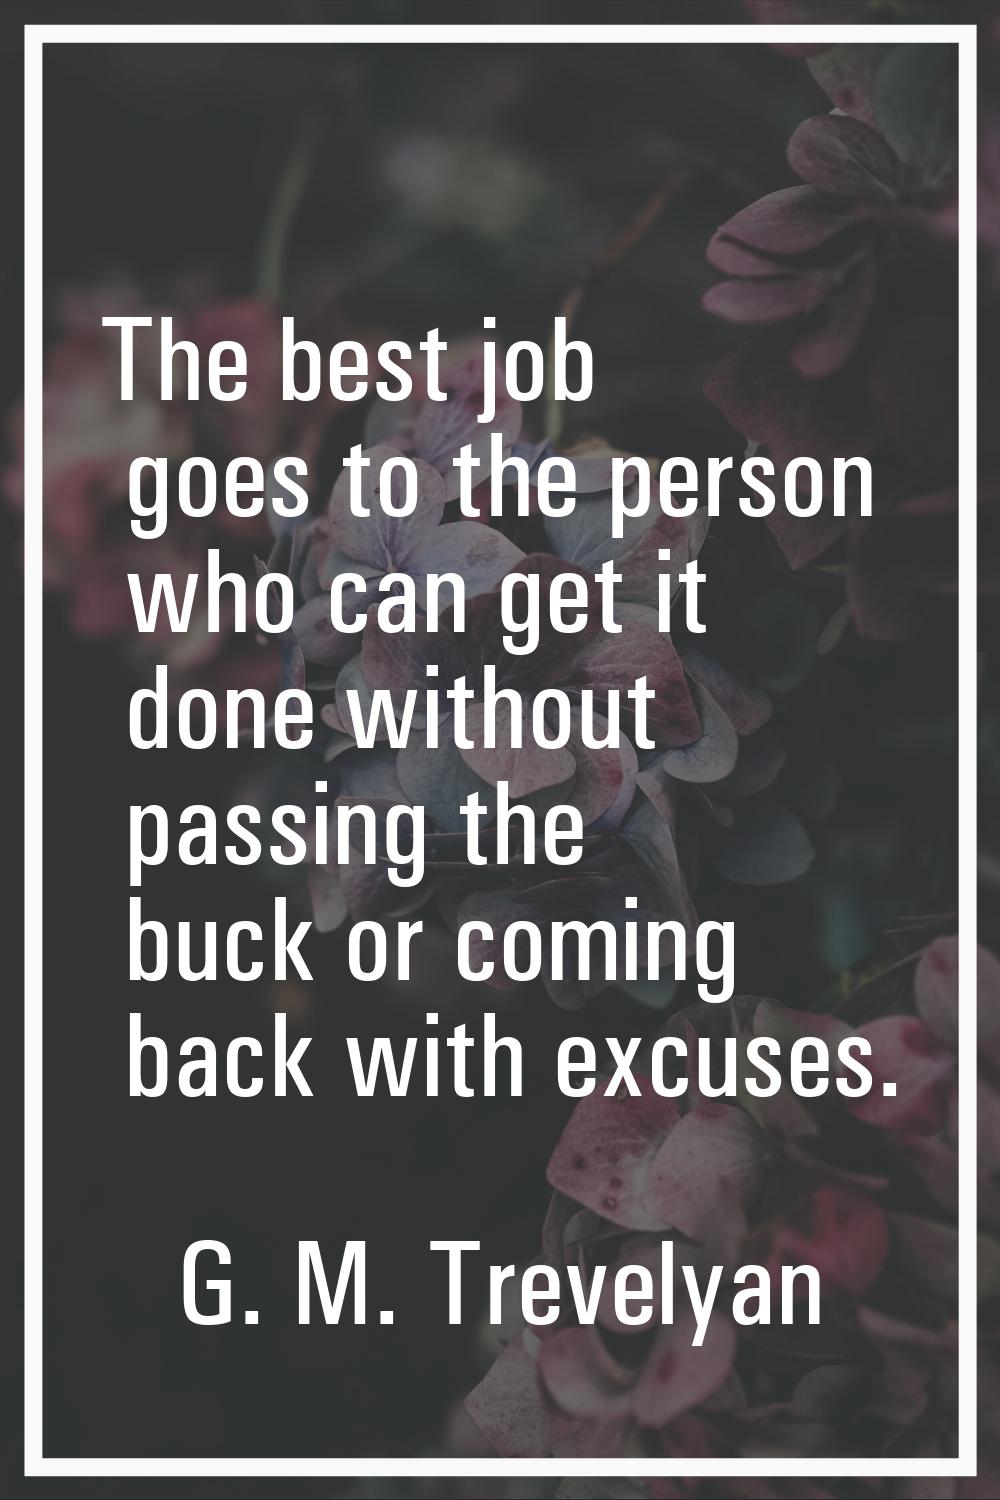 The best job goes to the person who can get it done without passing the buck or coming back with ex